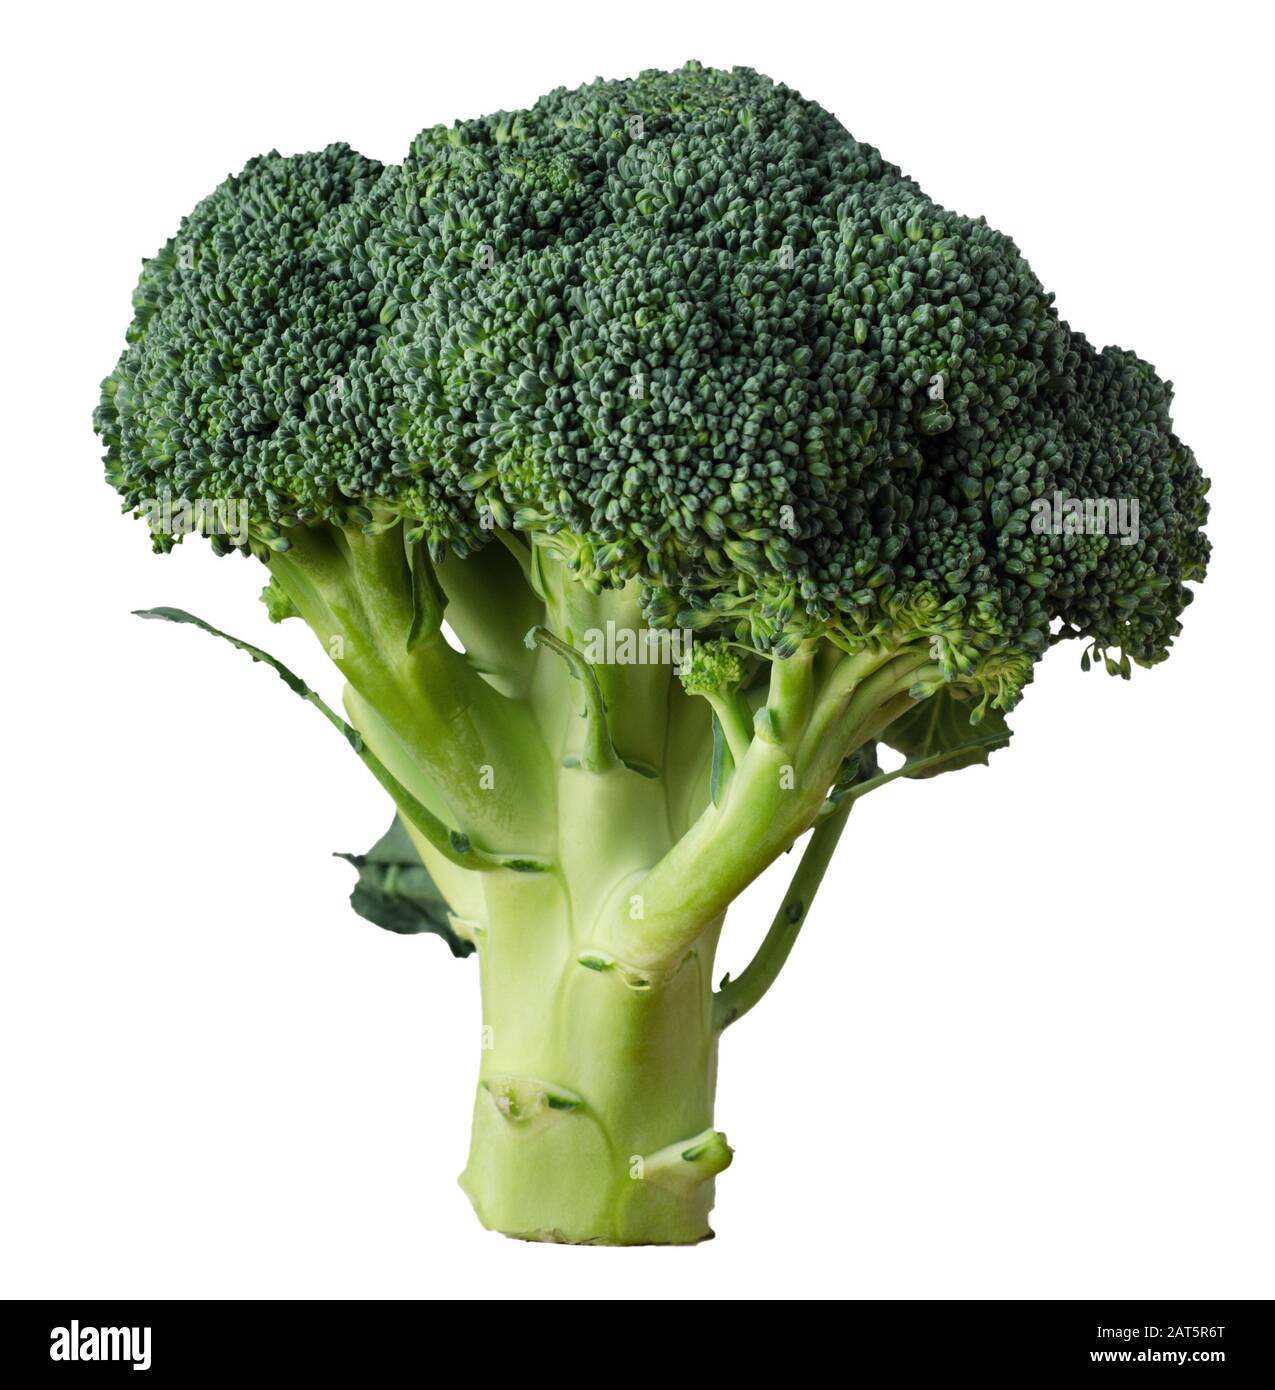 A head of broccoli, standing upright and isolated on white background. Stock Photo